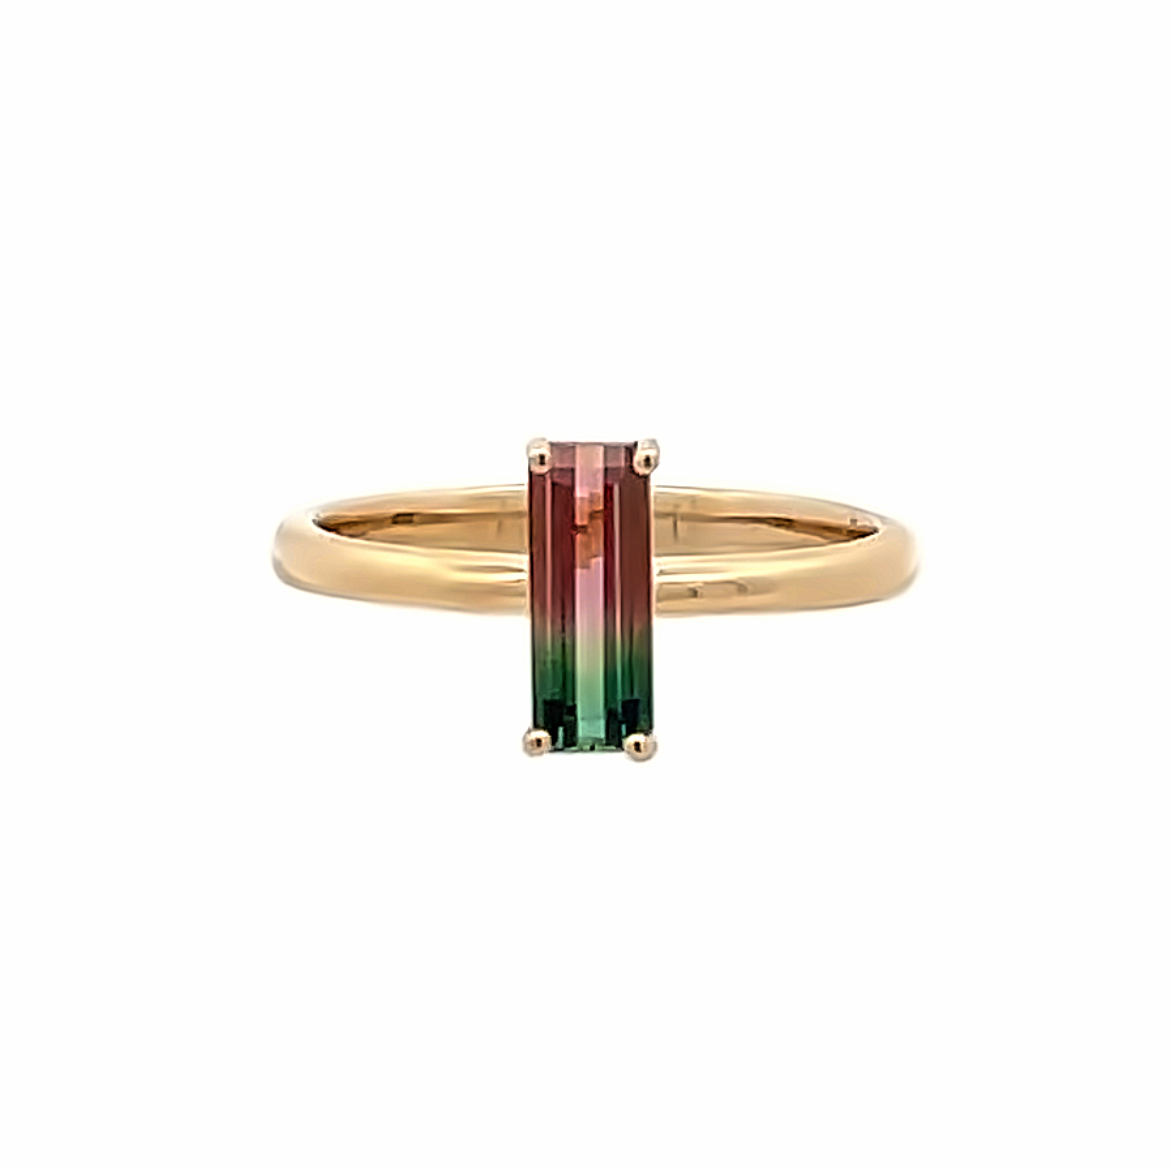 14K YELLOW GOLD SOLITAIRE RING SIZE 7 WITH ONE 0.88CT EMERALD BI-COLOR TOURMALINE   (2.57 GRAMS)